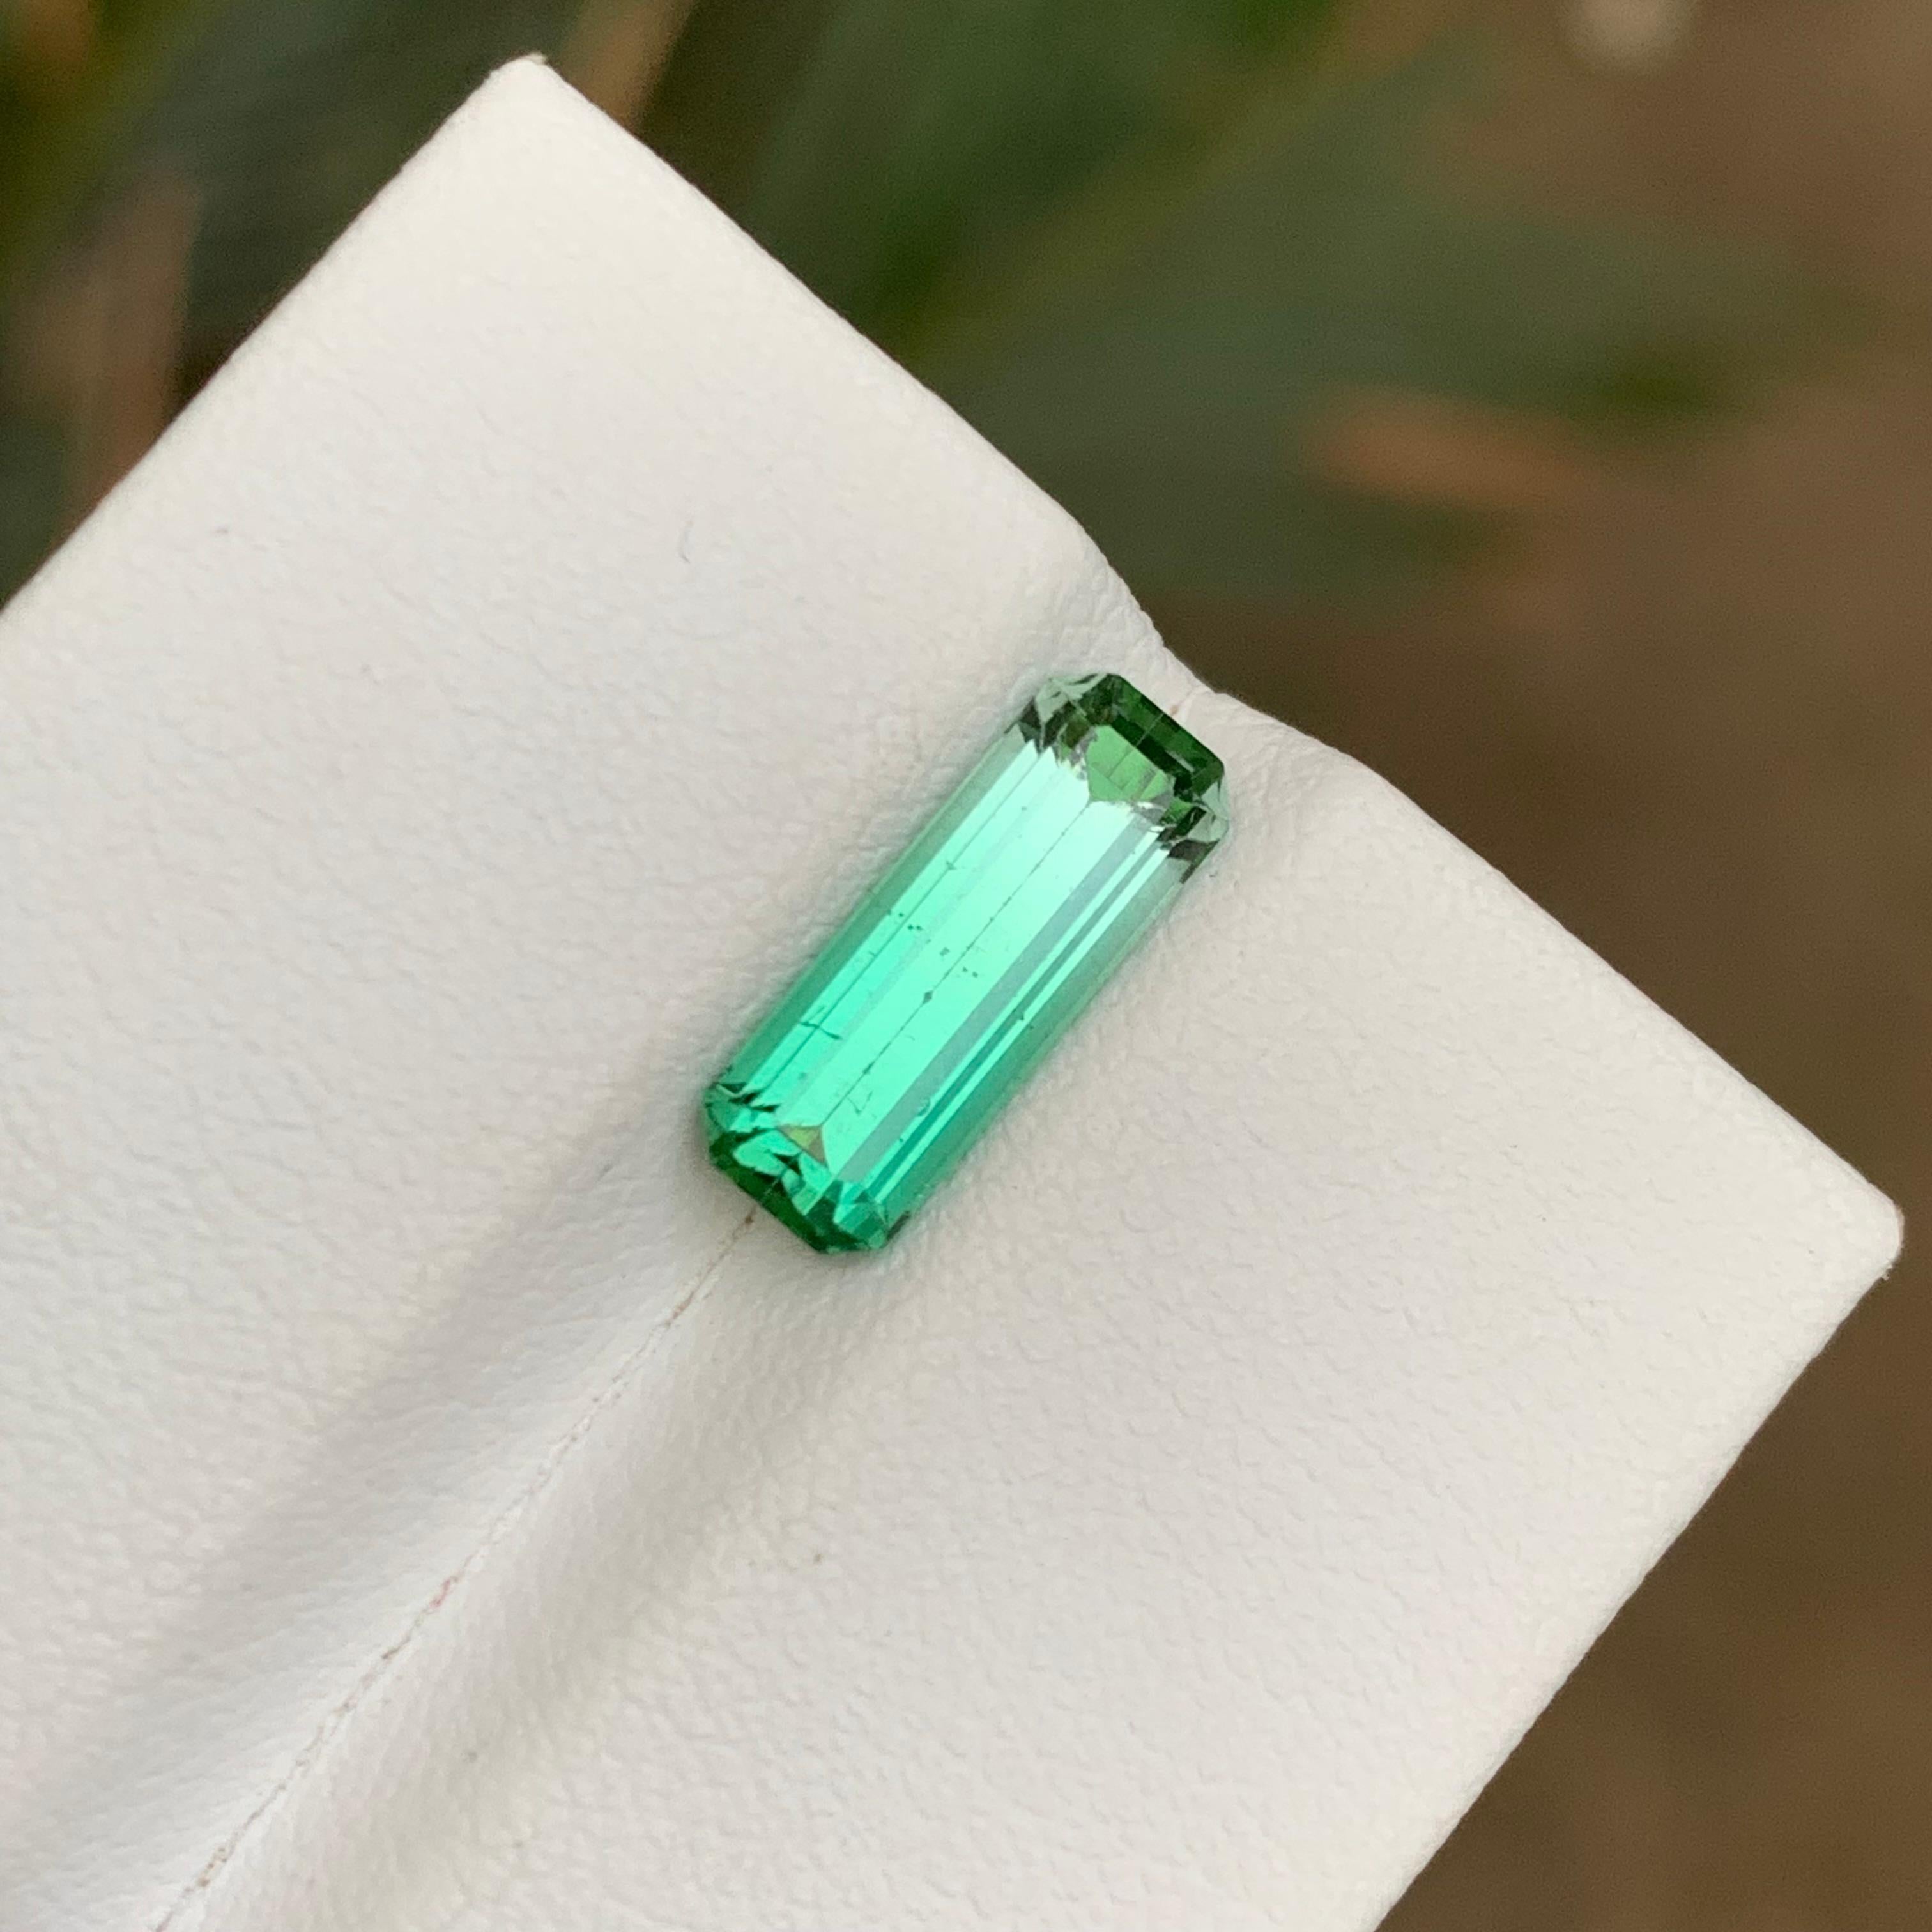 GEMSTONE TYPE: Tourmaline
PIECE(S): 1
WEIGHT: 2.25 Carats
SHAPE: Emerald
SIZE (MM): 12.52 x 4.61 x 4.34
COLOR: Vivid Bluish Green Bicolor
CLARITY: Slightly Included 
TREATMENT: None
ORIGIN: Afghanistan
CERTIFICATE: On demand

Indulge in the allure